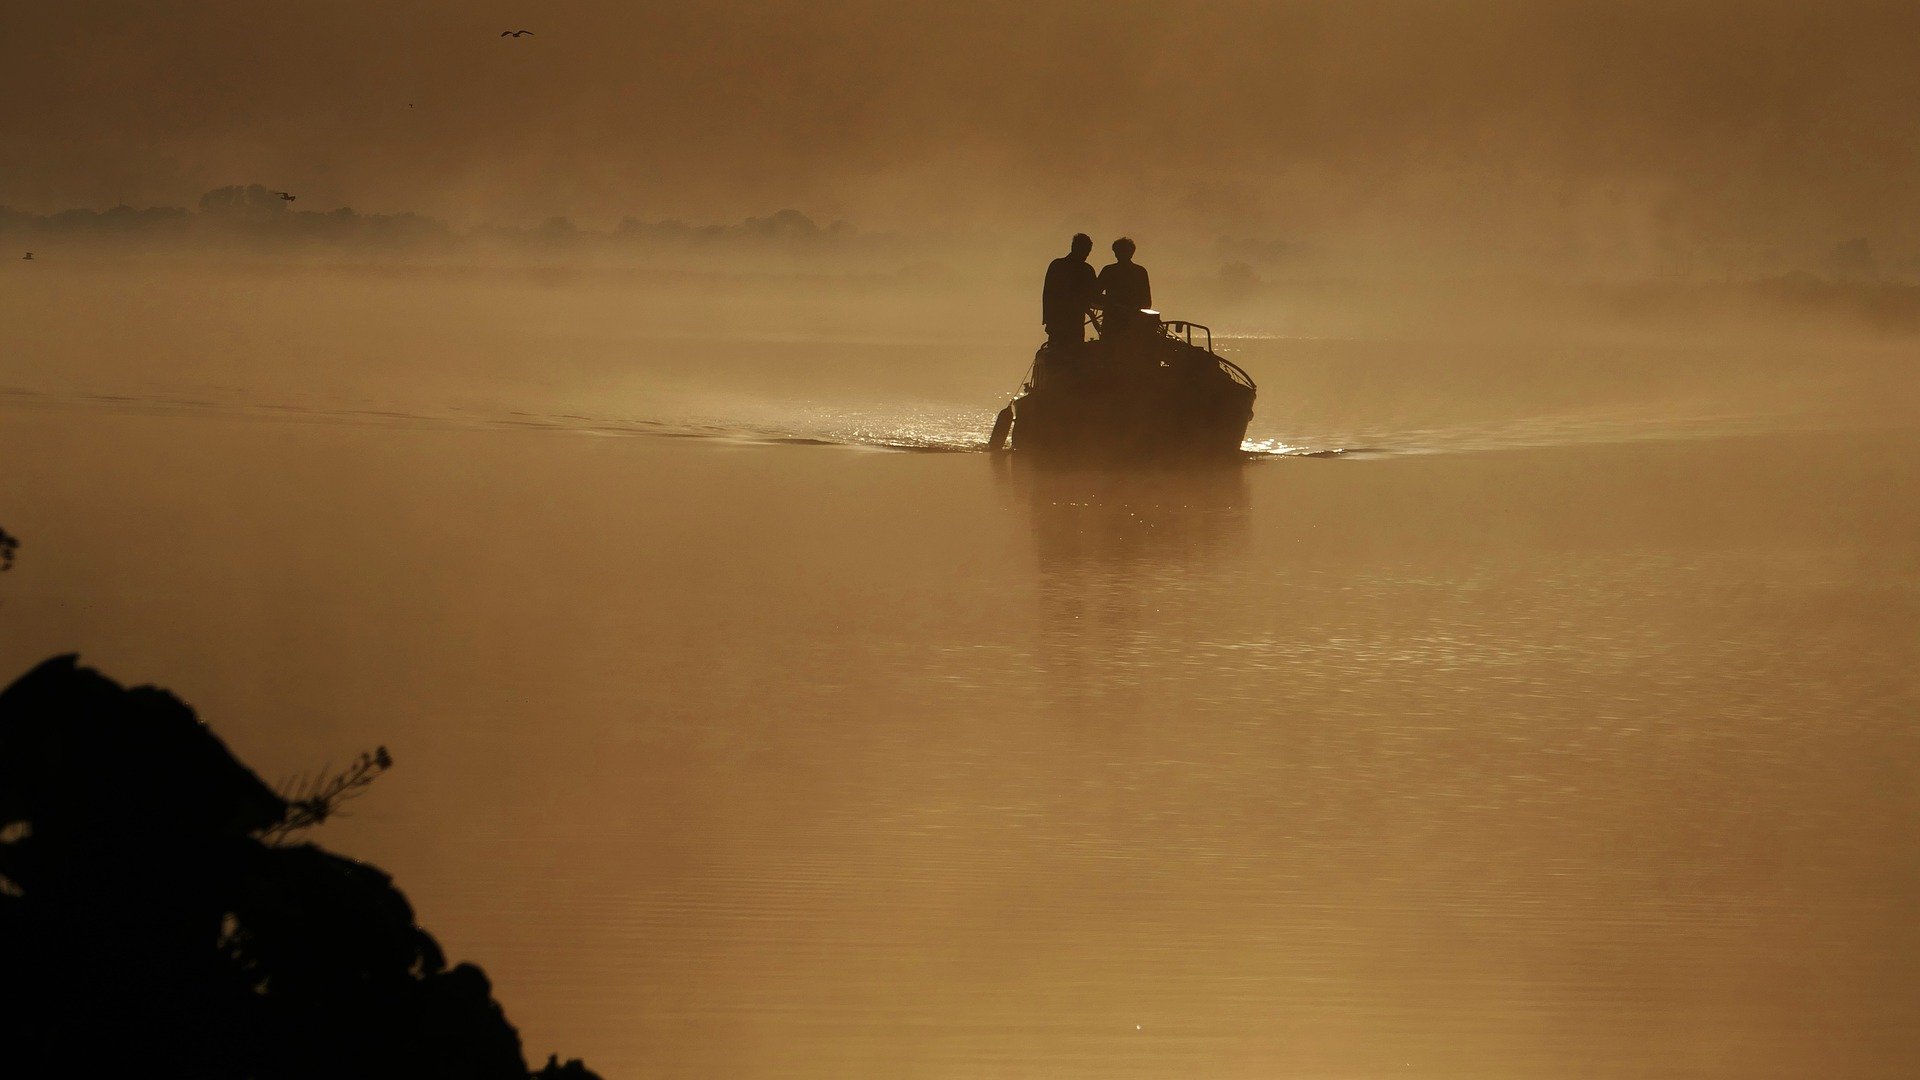 Pictured - Two individuals on a boat in the river channel | Photo: Getty Images